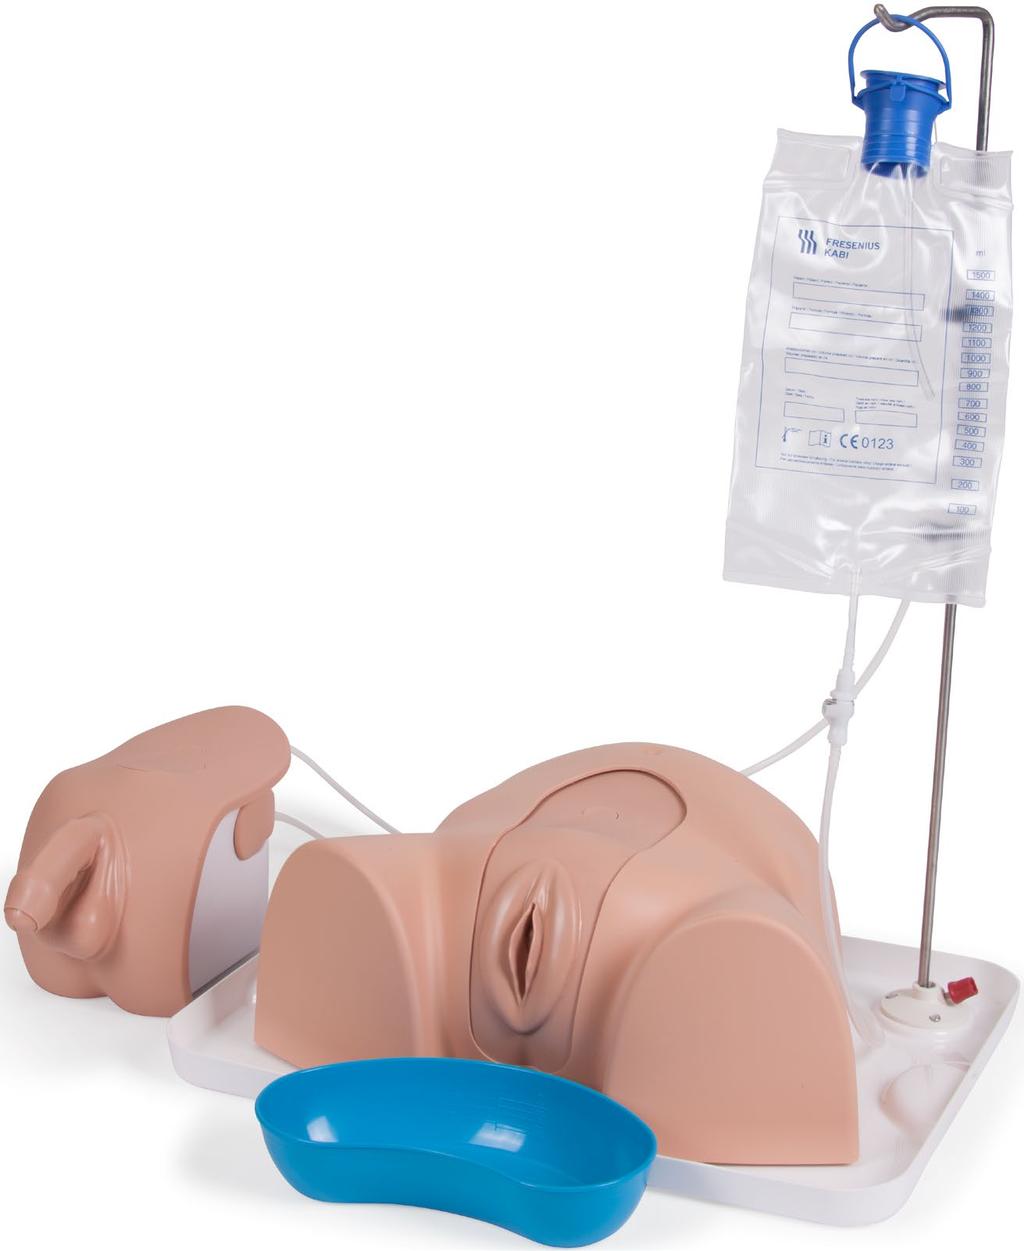 Advanced Catheterisation Trainer Product No: 60150 User Guide For more skills training products visit limbsandthings.